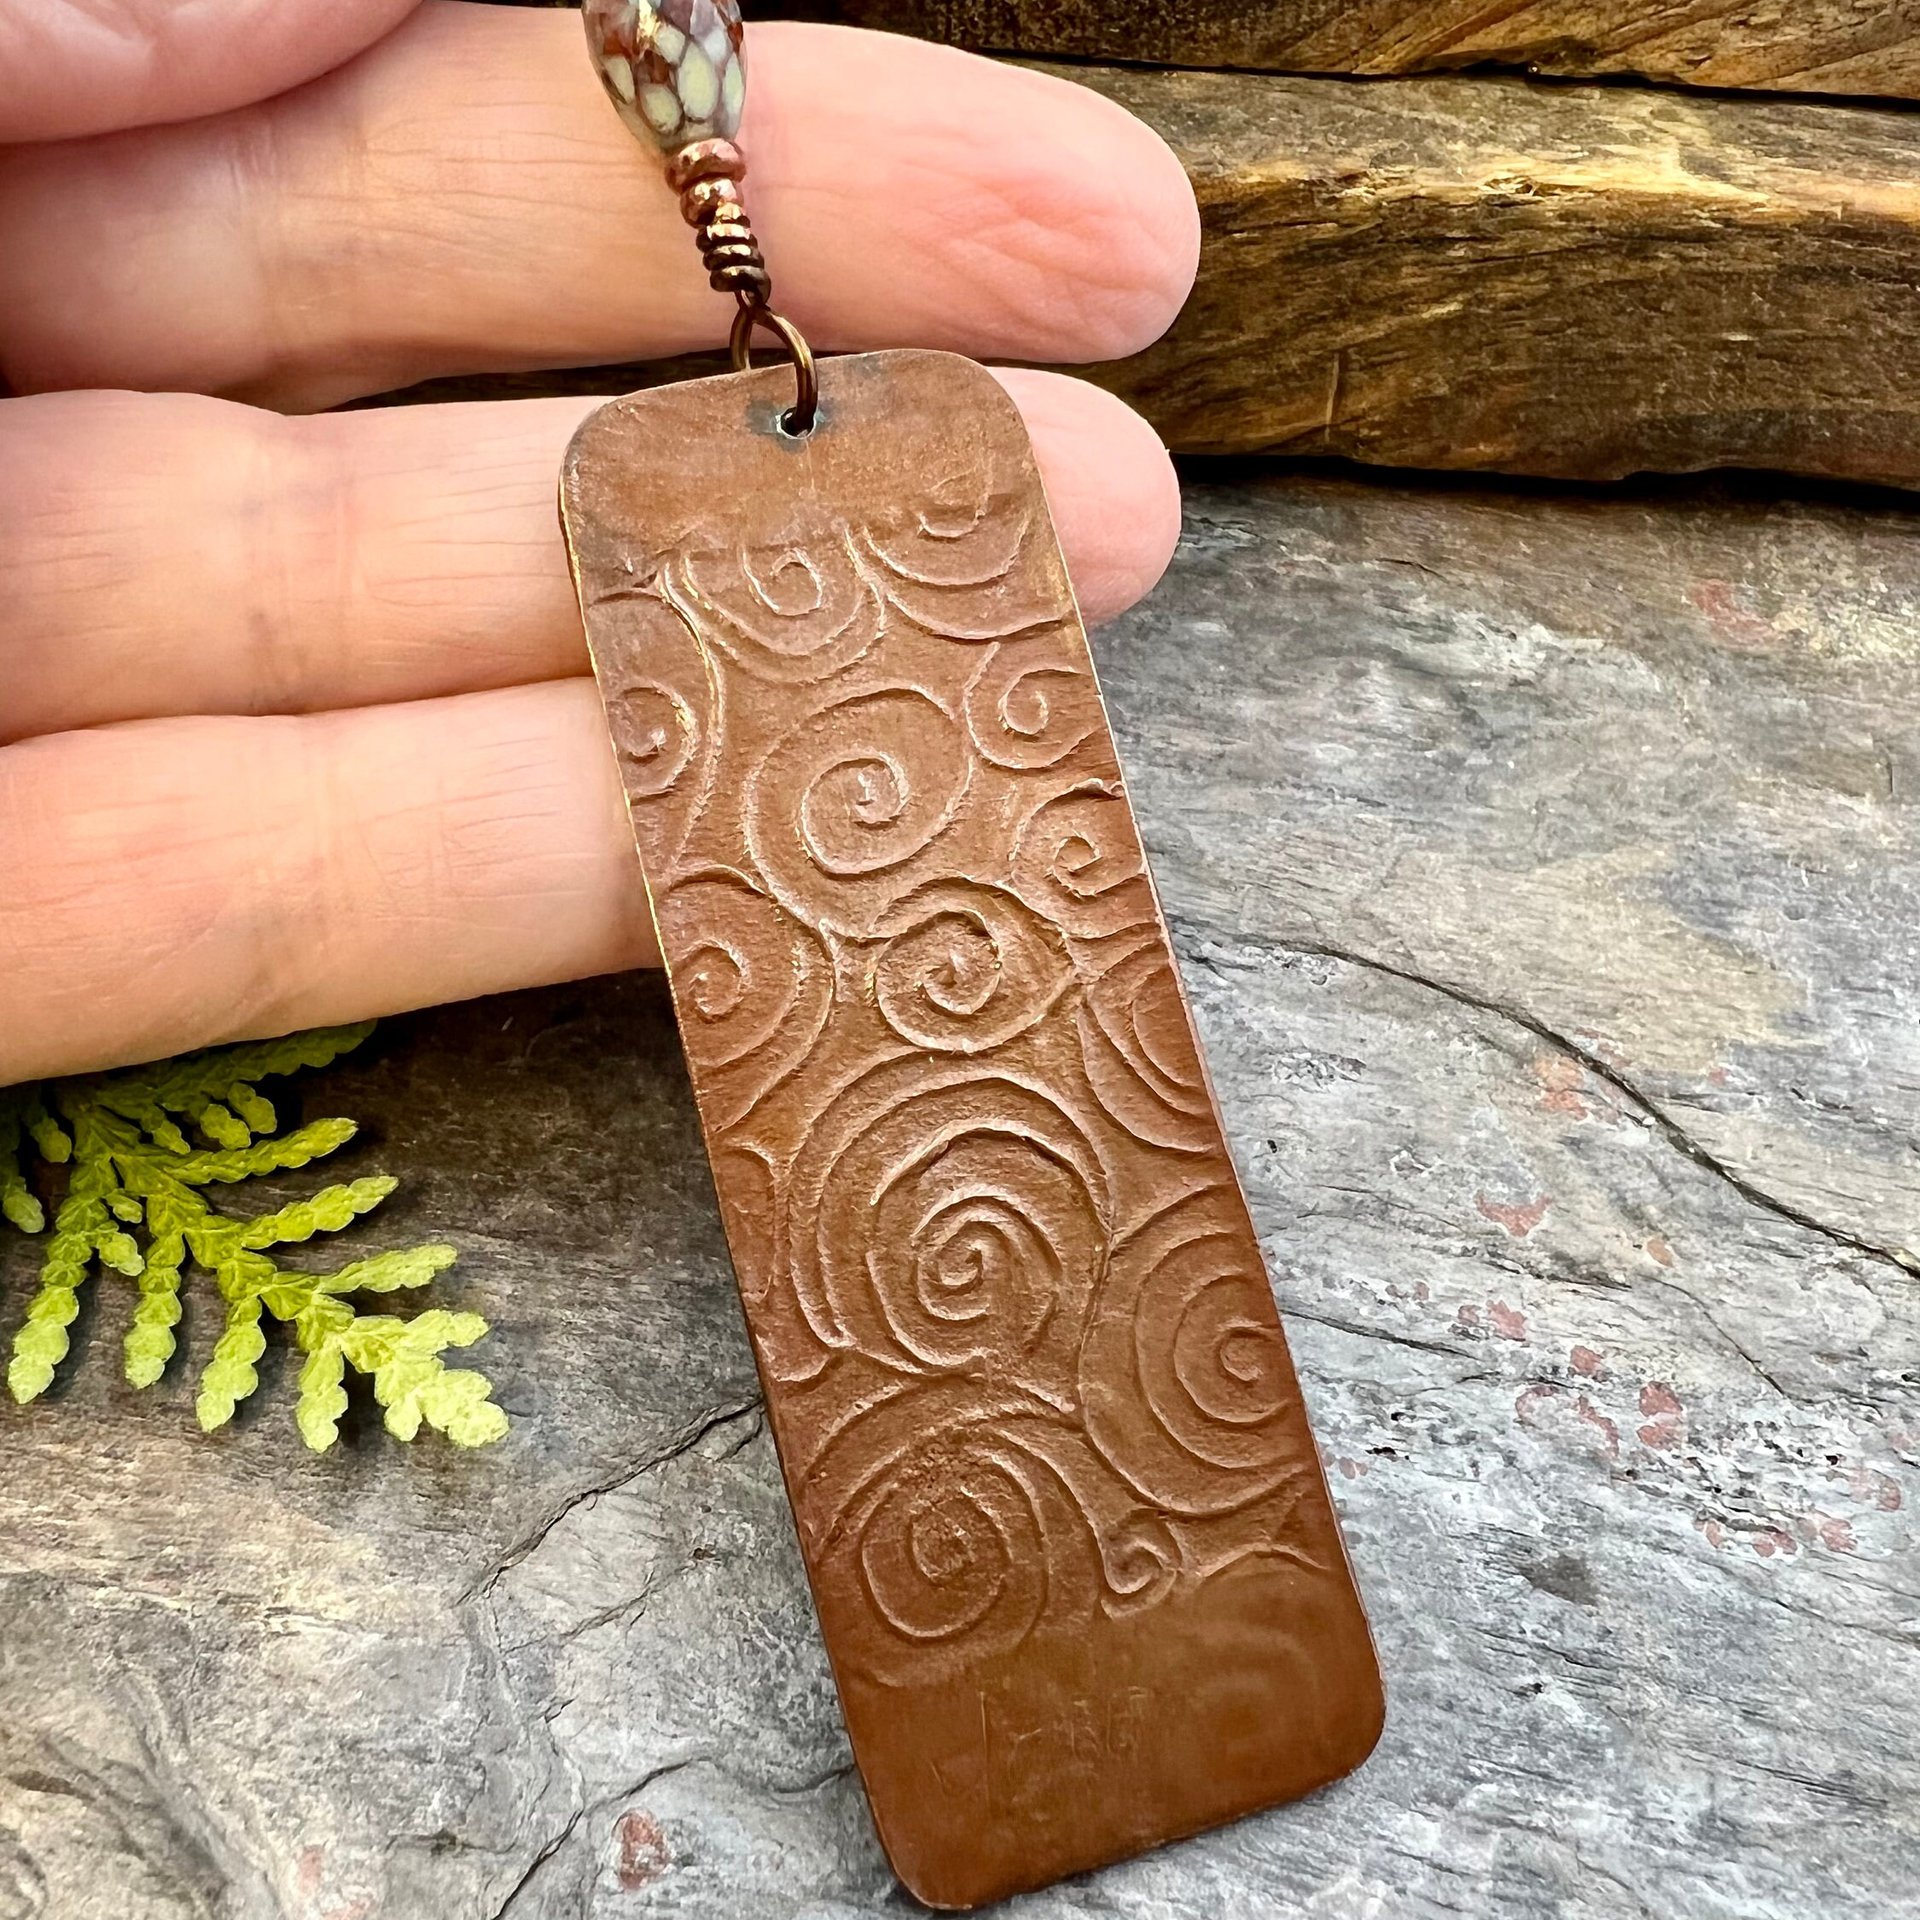 Raven Full Moon, Copper Pendant, Celtic Spirals, Colorful Patina, Czech Glass, Leather & Vegan Cords, Handmade Art Jewelry, Pagan Witch Gift